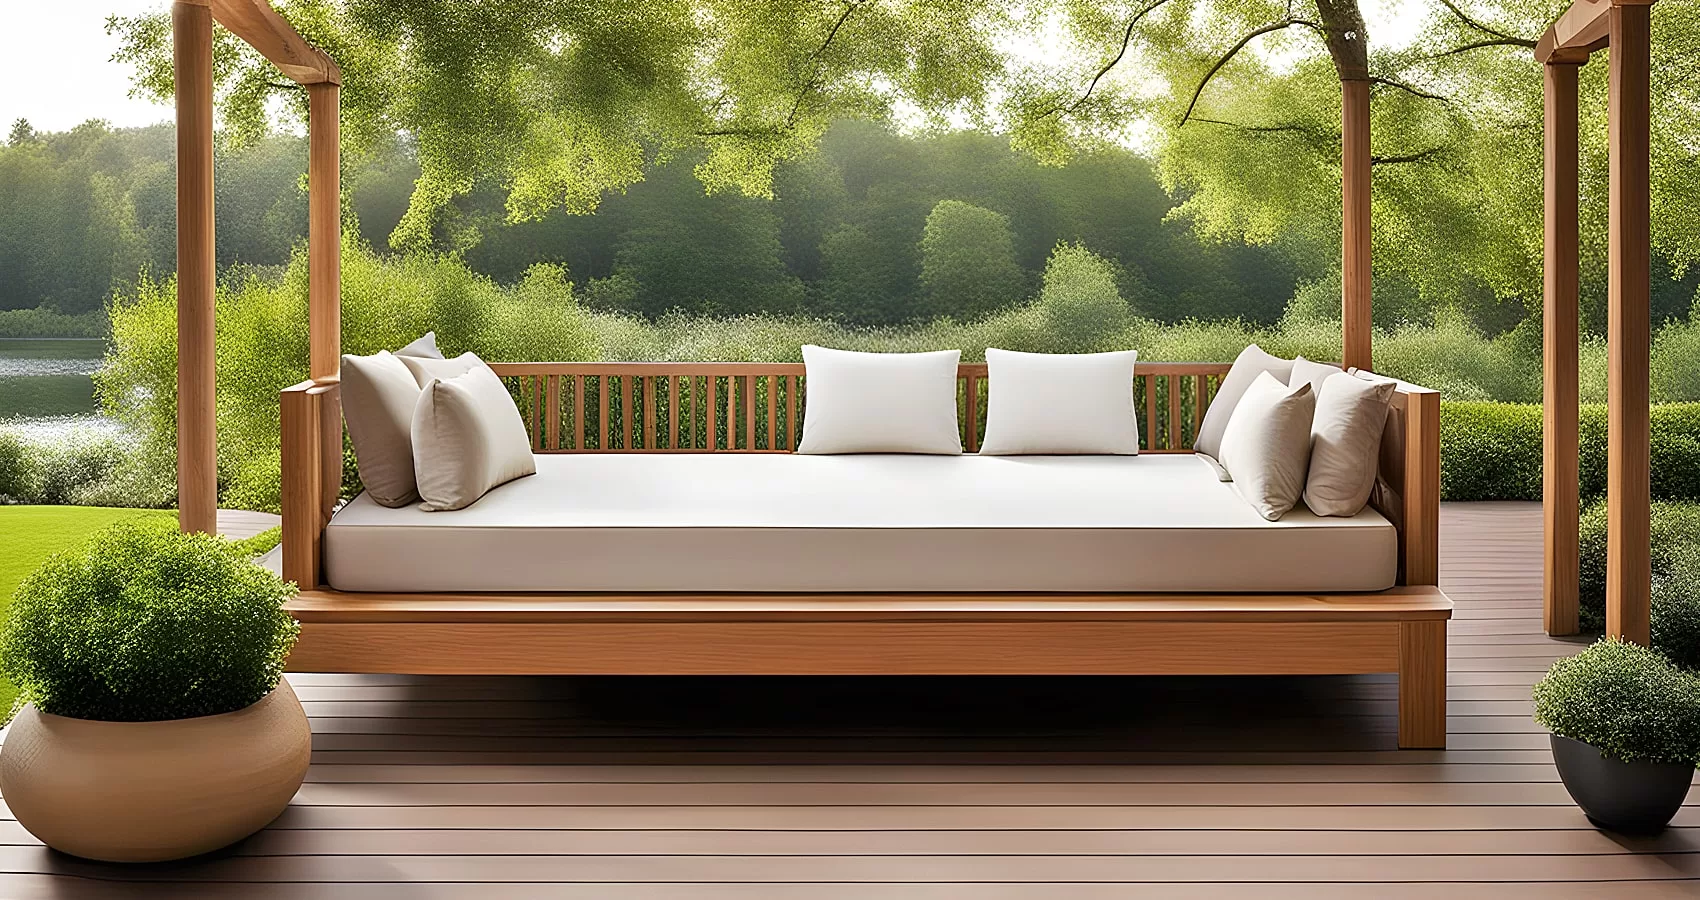 Outdoor Day Beds